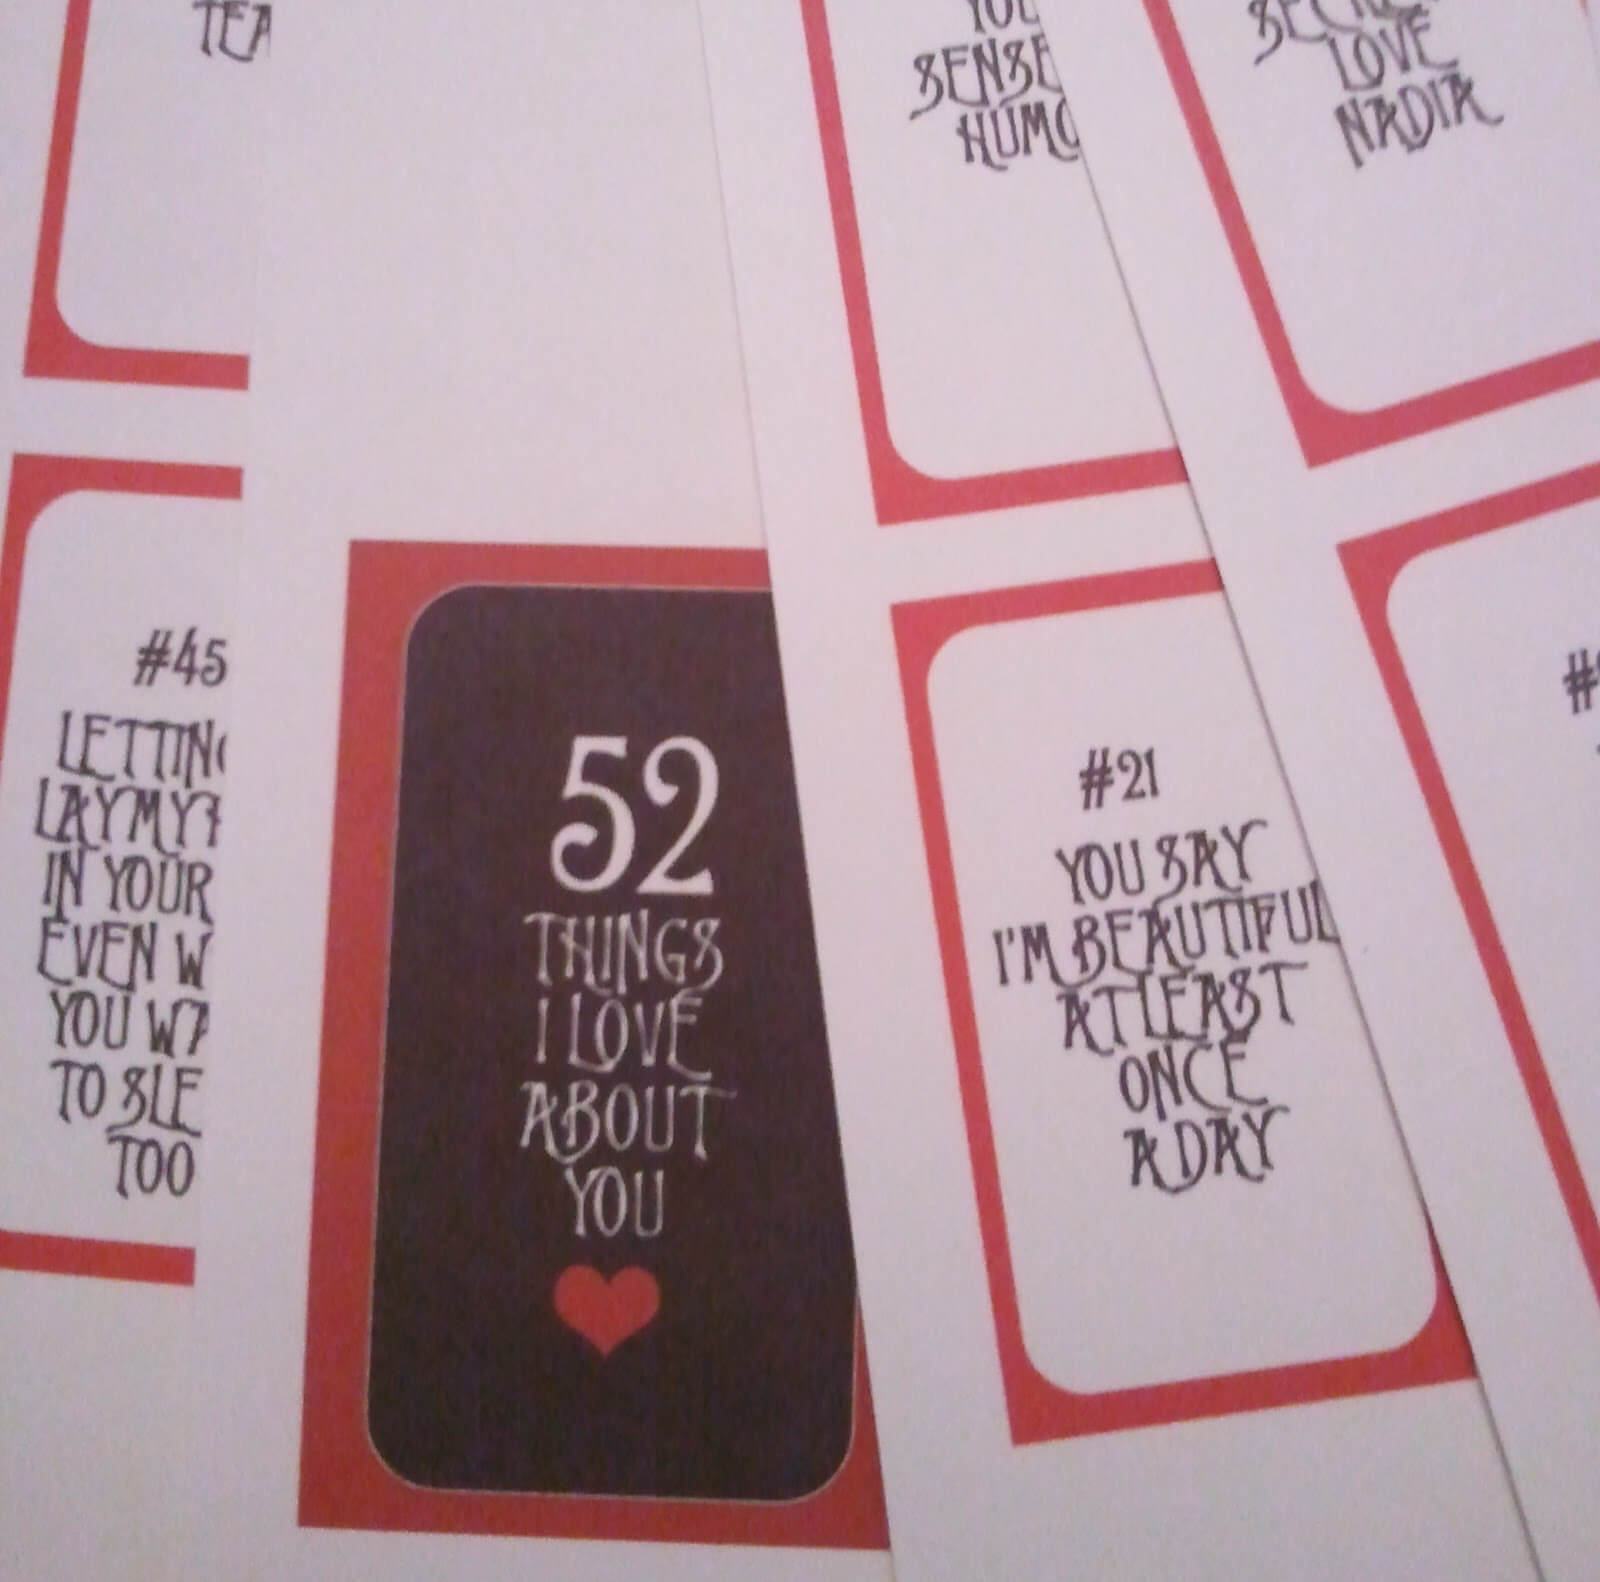 28 Images Of 52 Things Template | Vanscapital Regarding 52 Things I Love About You Cards Template